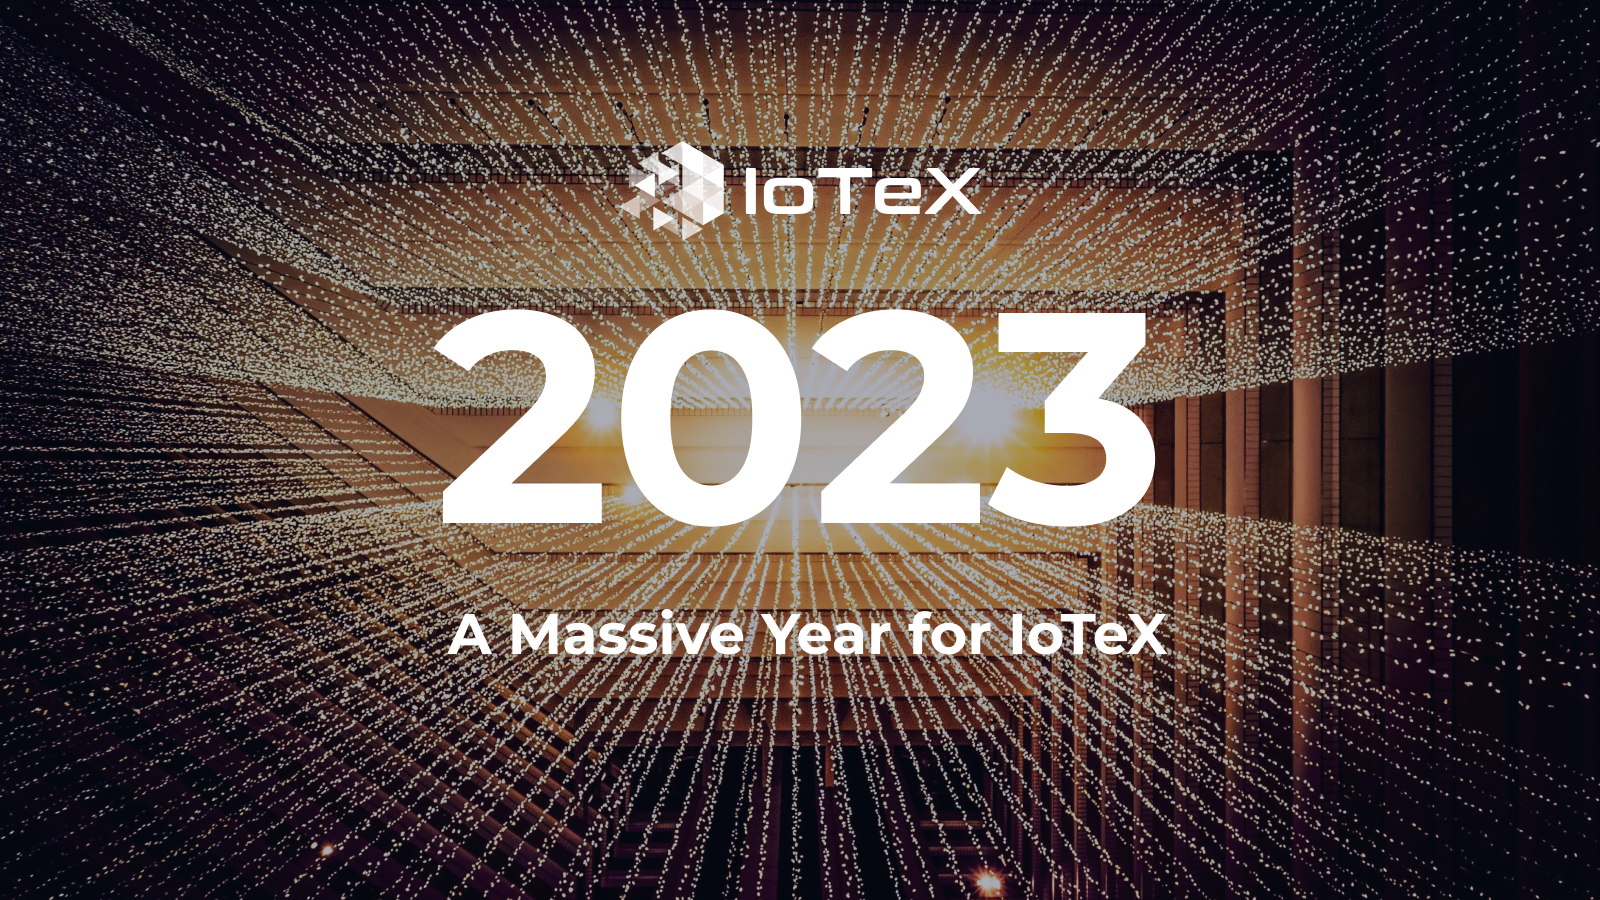 2023: A Massive Year for IoTeX